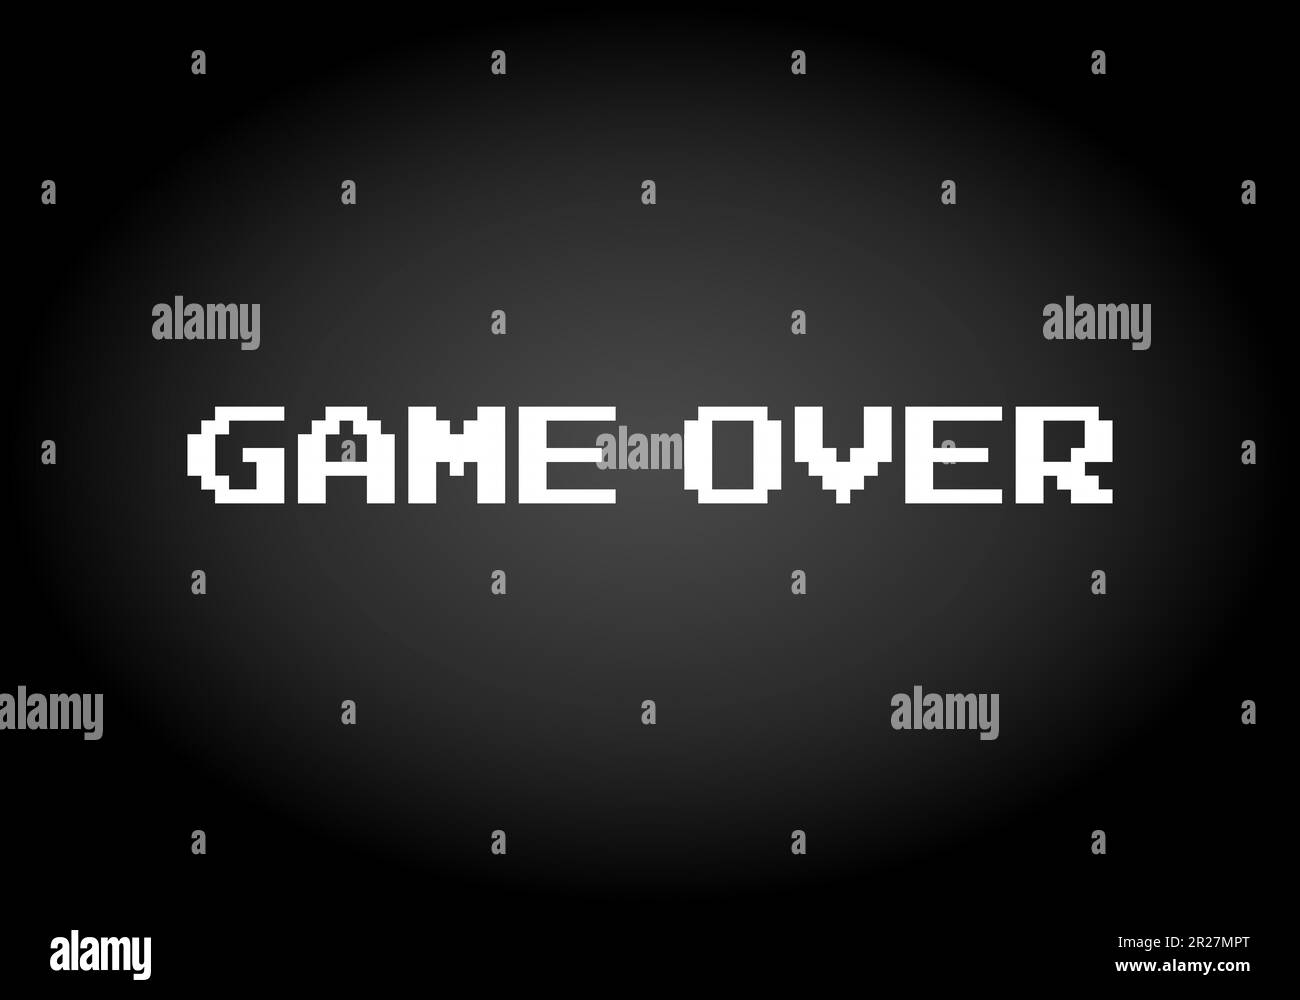 8-bit pixel text, game over. Background icon for game assets in vector illustrations. Stock Vector